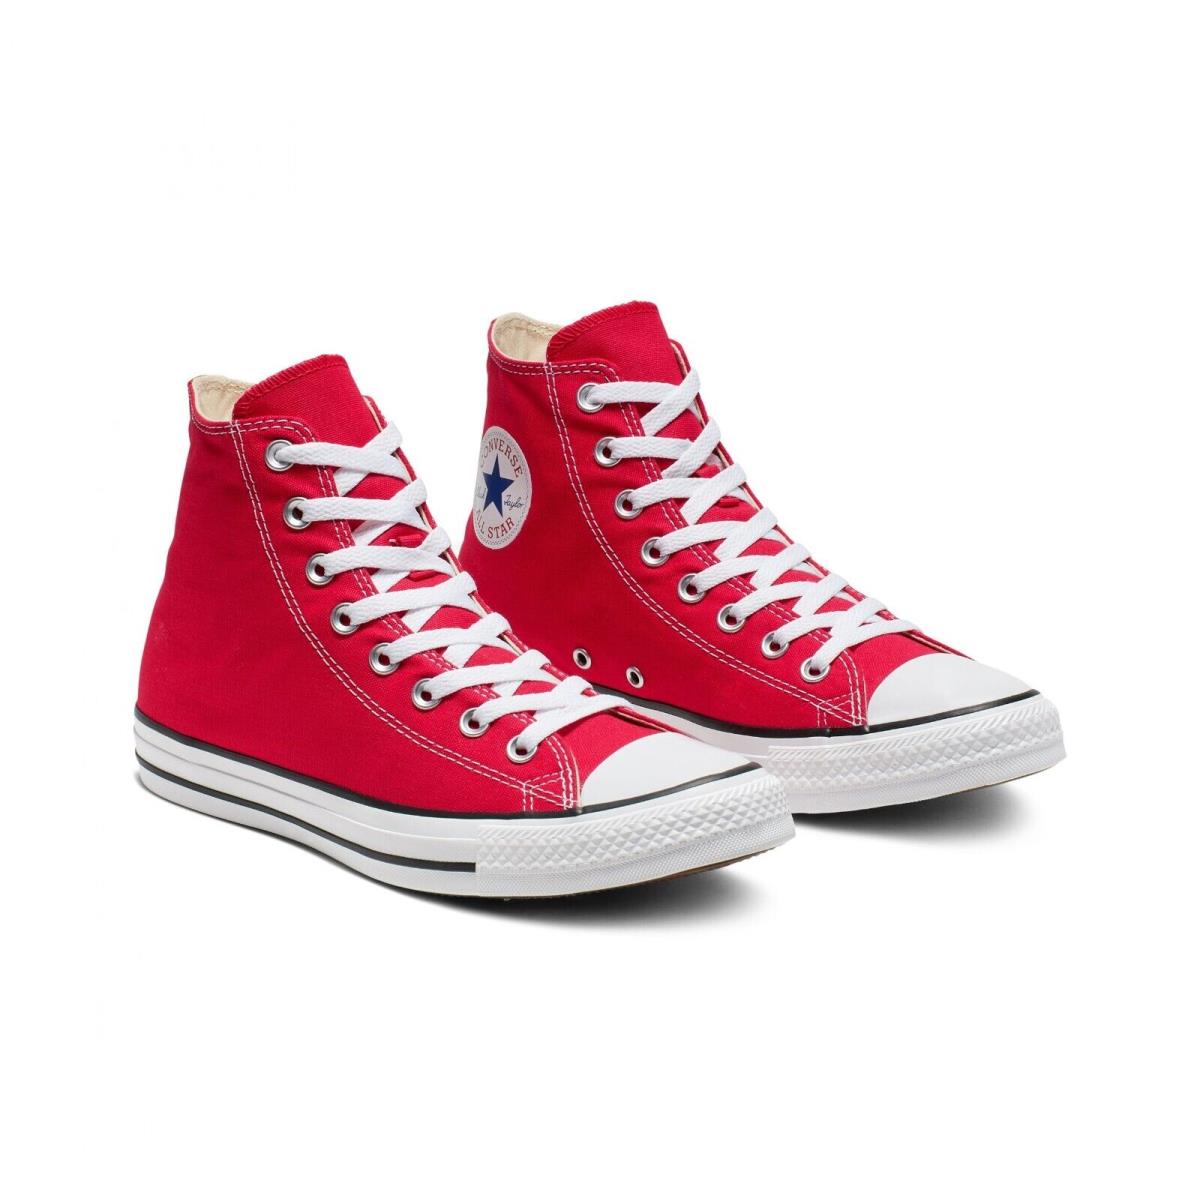 Converse Chuck Taylor All Star Hi M9621C Unisex Red Shoes Size M3.5 / W5.5 C419